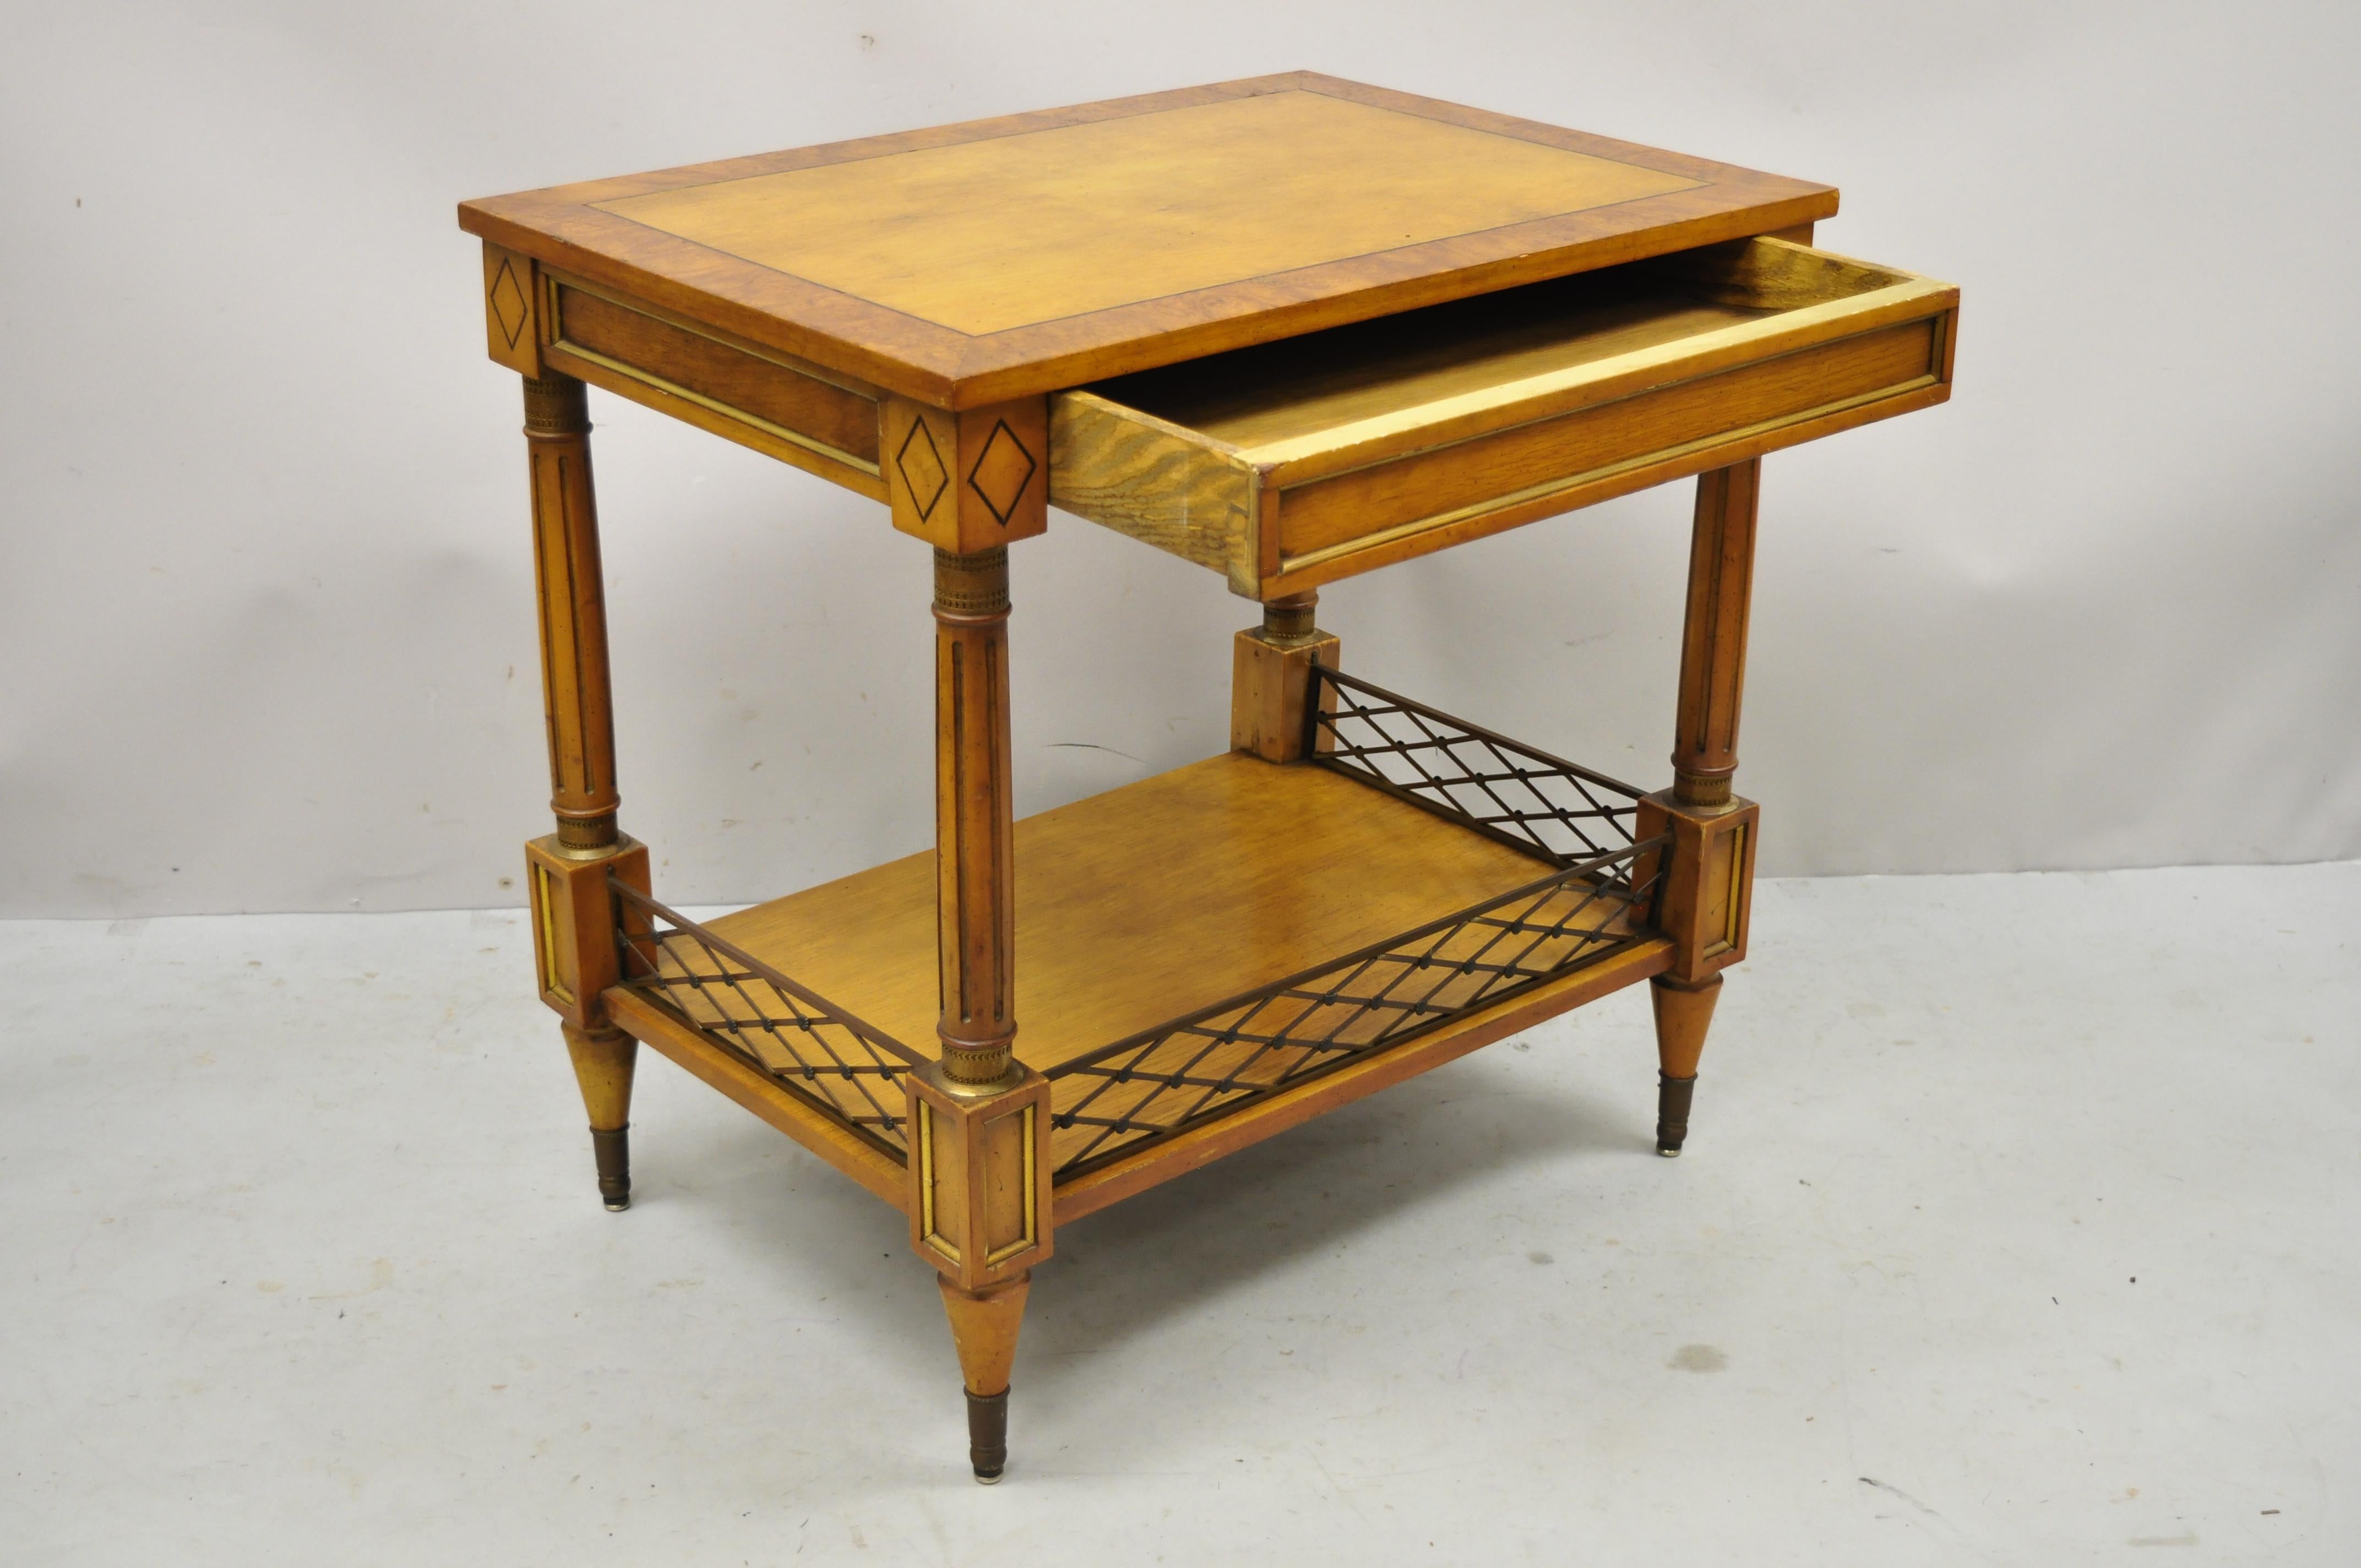 Beacon Hill Italian Regency Neoclassical One Drawer Burl Wood Accent side table. Item features burl wood banded top, brass ormolu, lower shelf, 1 dovetailed drawer, very nice vintage item, quality American craftsmanship, great style and form. Circa